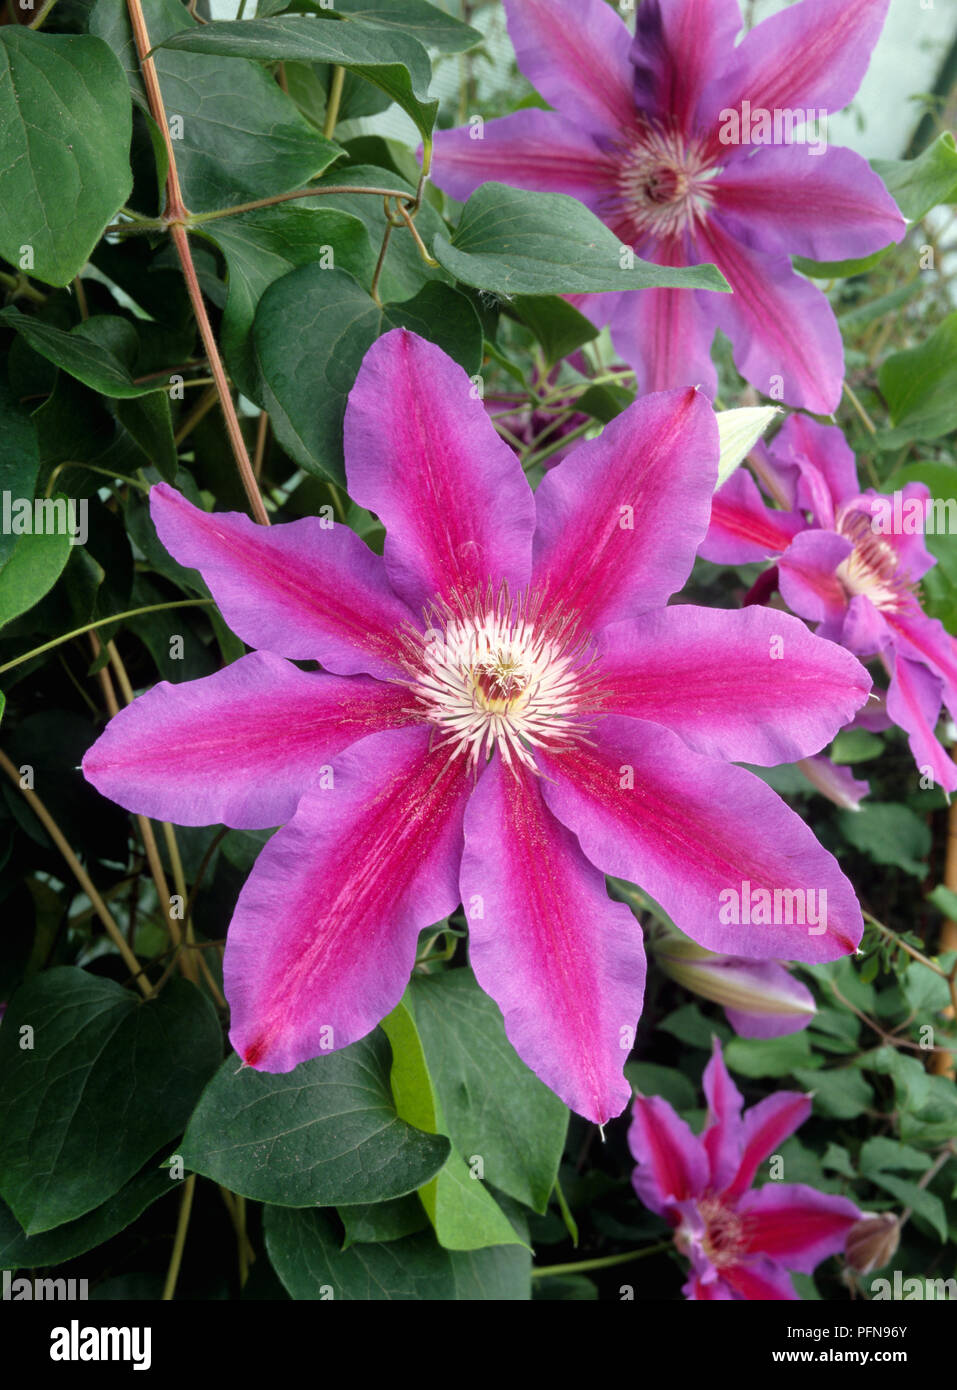 Clematis Fireworks, pink-purple flowers, close up. Stock Photo